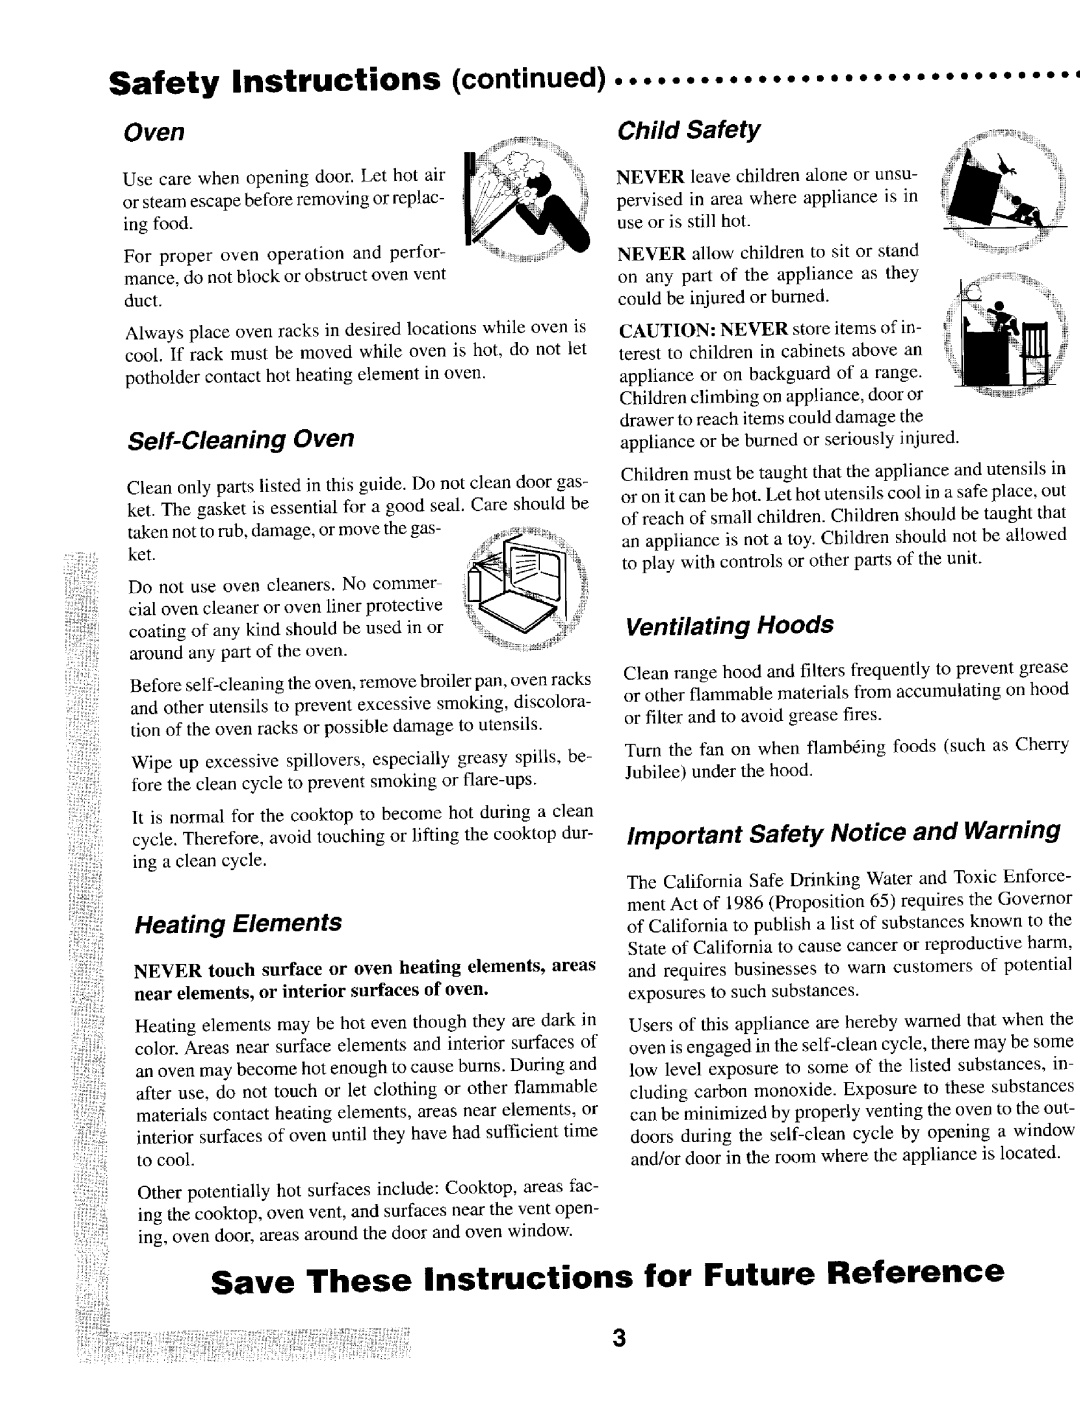 Maytag T1 manual Safety Instructions continued, Save These Instructions for Future Reference, Oven, Child Safety 